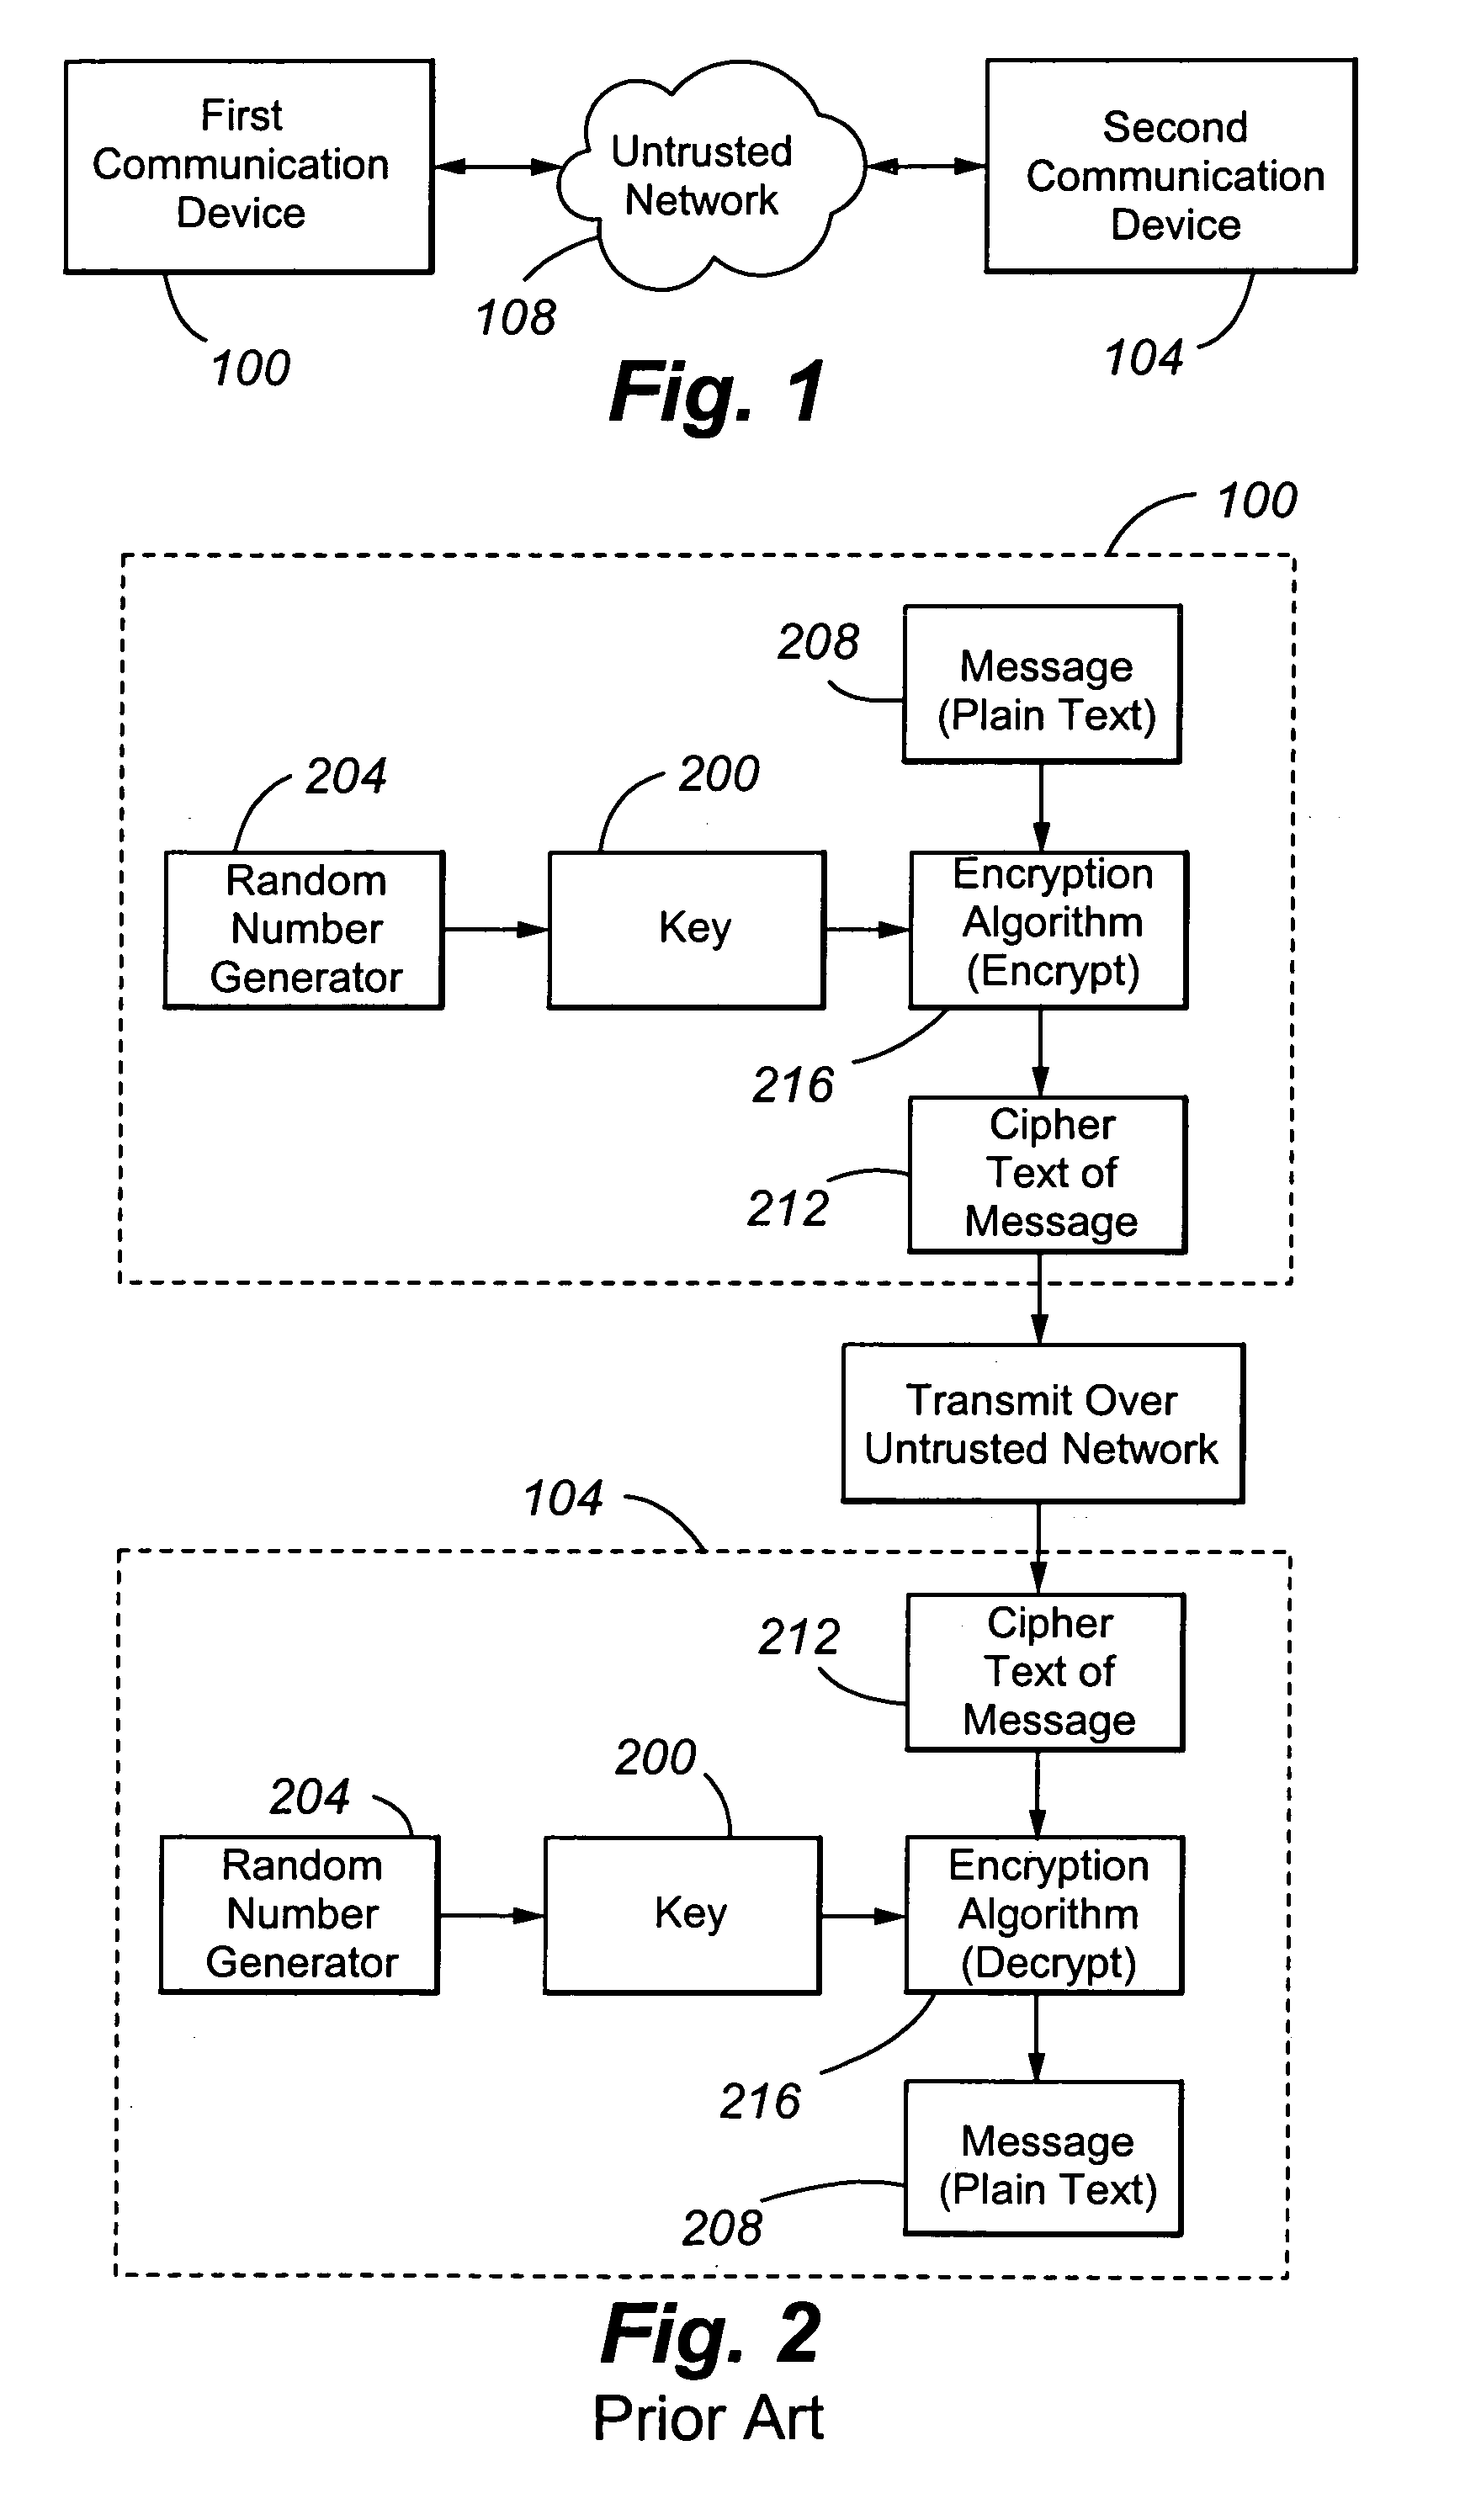 Method for undetectably impeding key strength of encryption usage for products exported outside the U.S